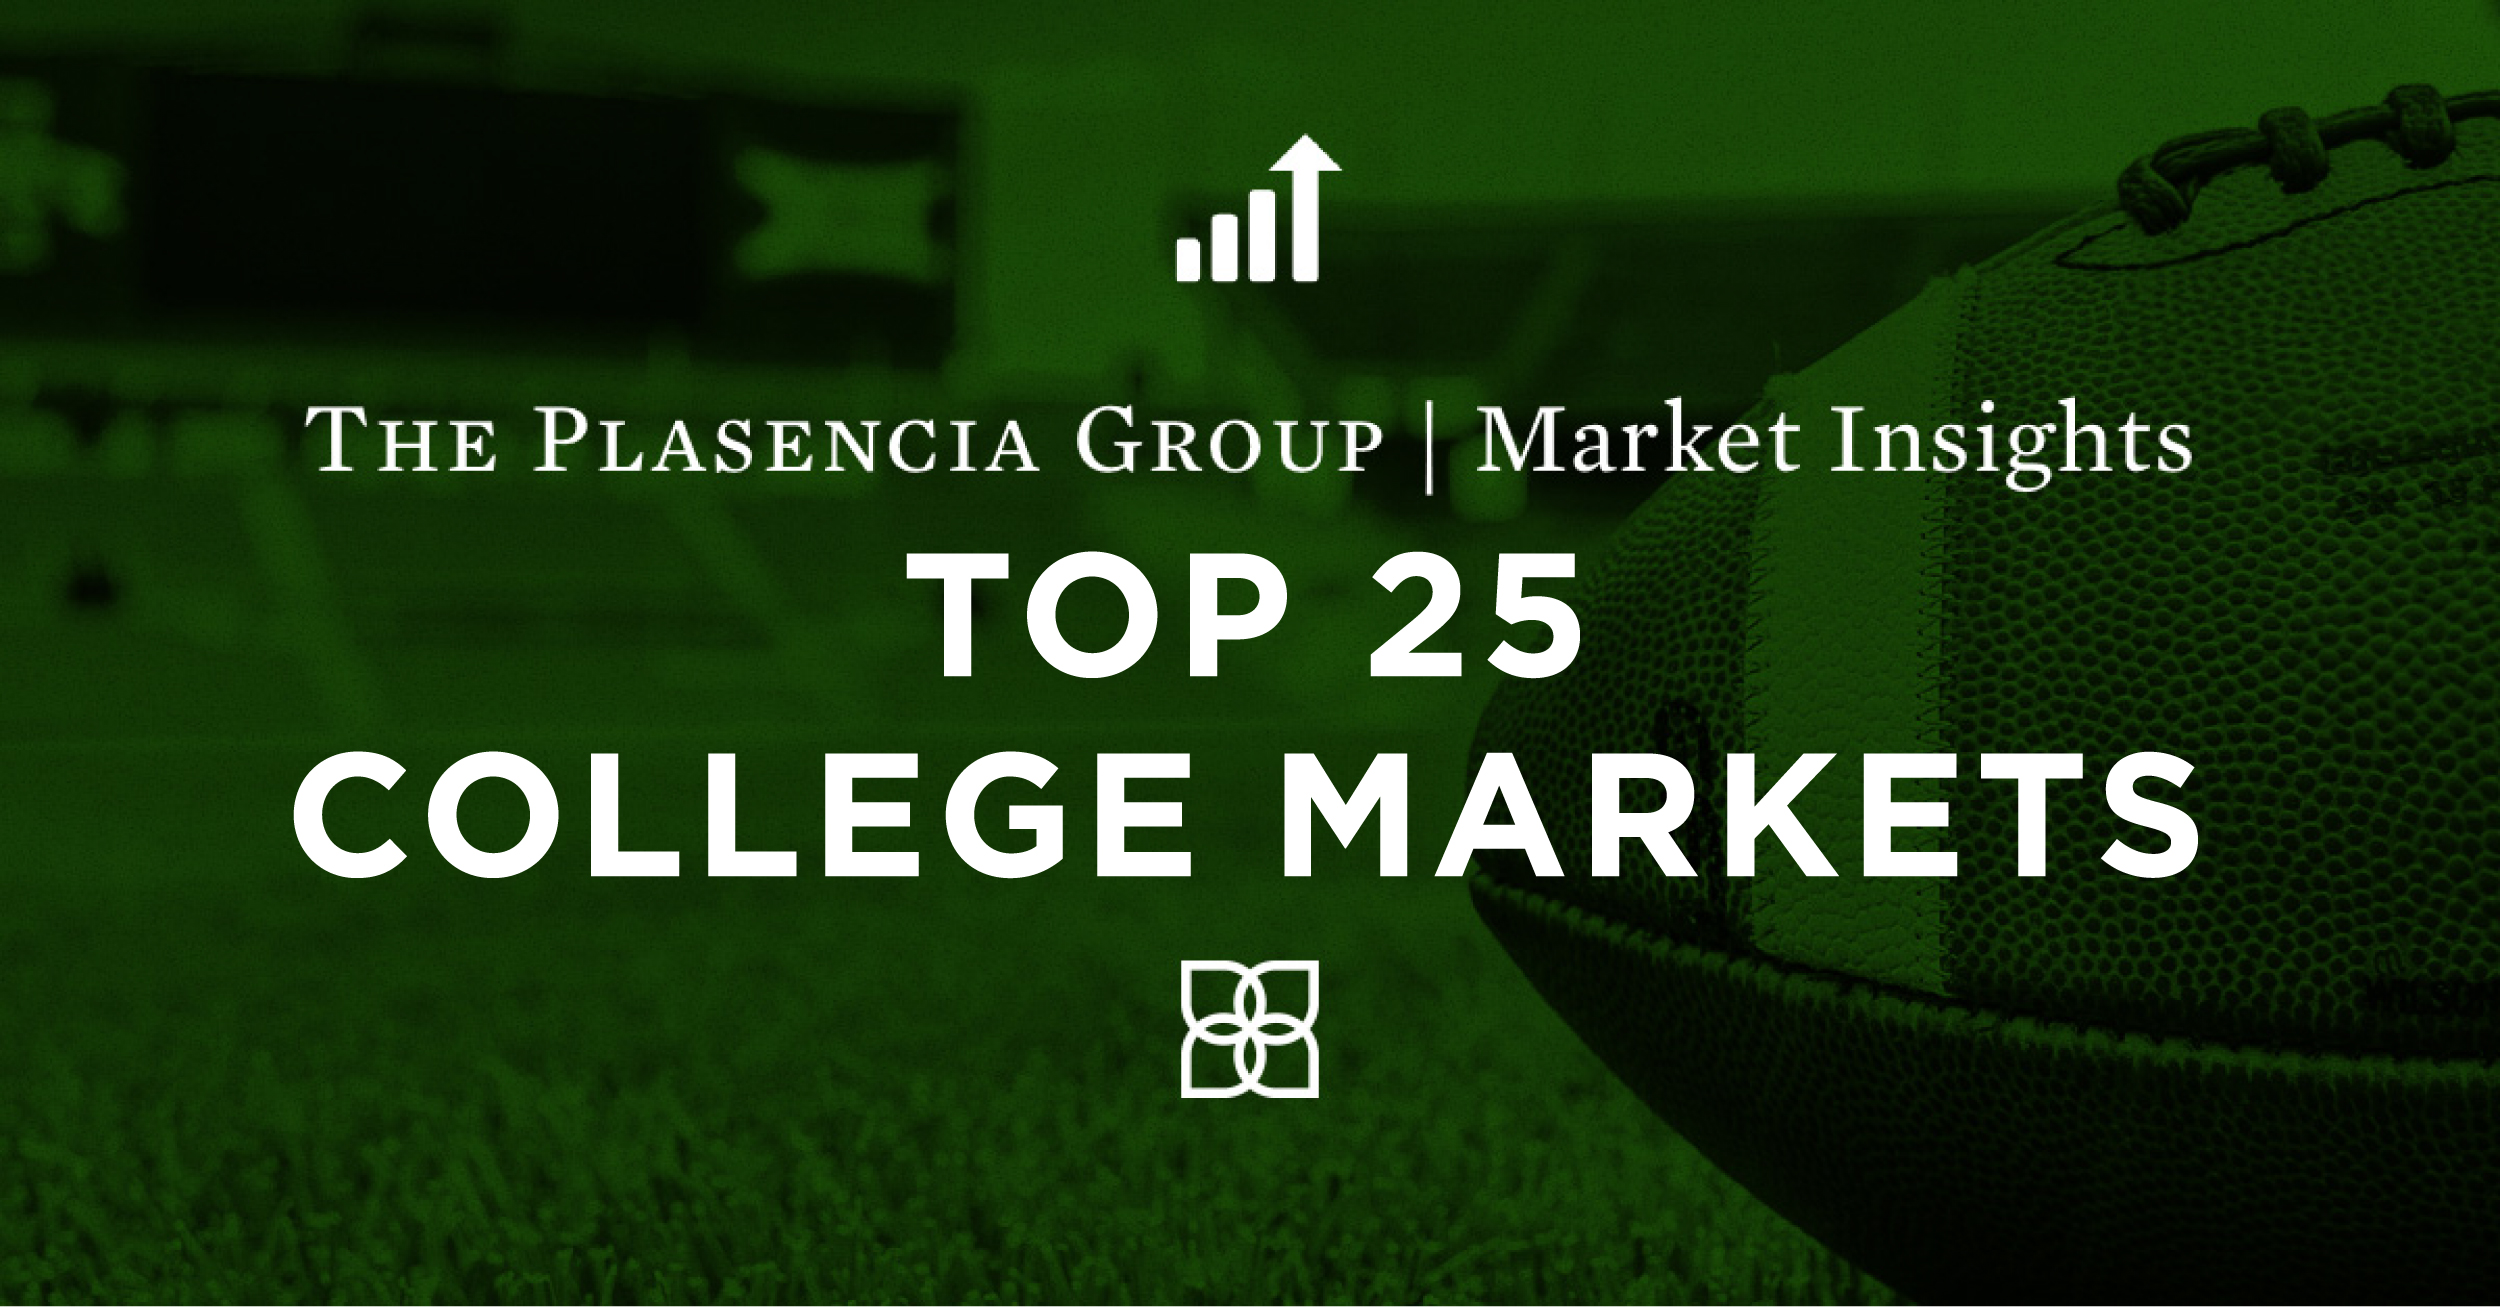 The Plasencia Group's Top 25 College Markets for 2023